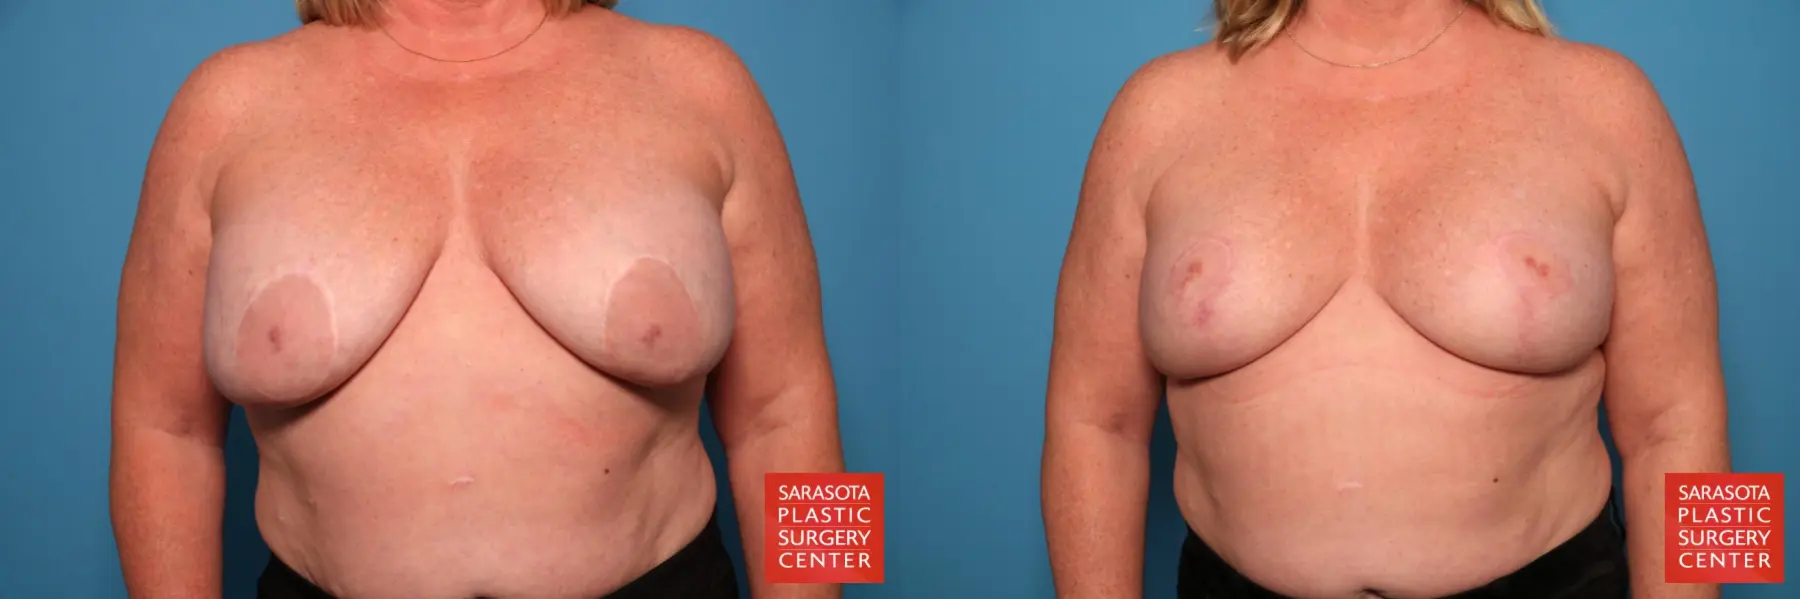 Breast Implant Removal/Replacement W/Lift And Tissue Removal: Patient 1 - Before and After  